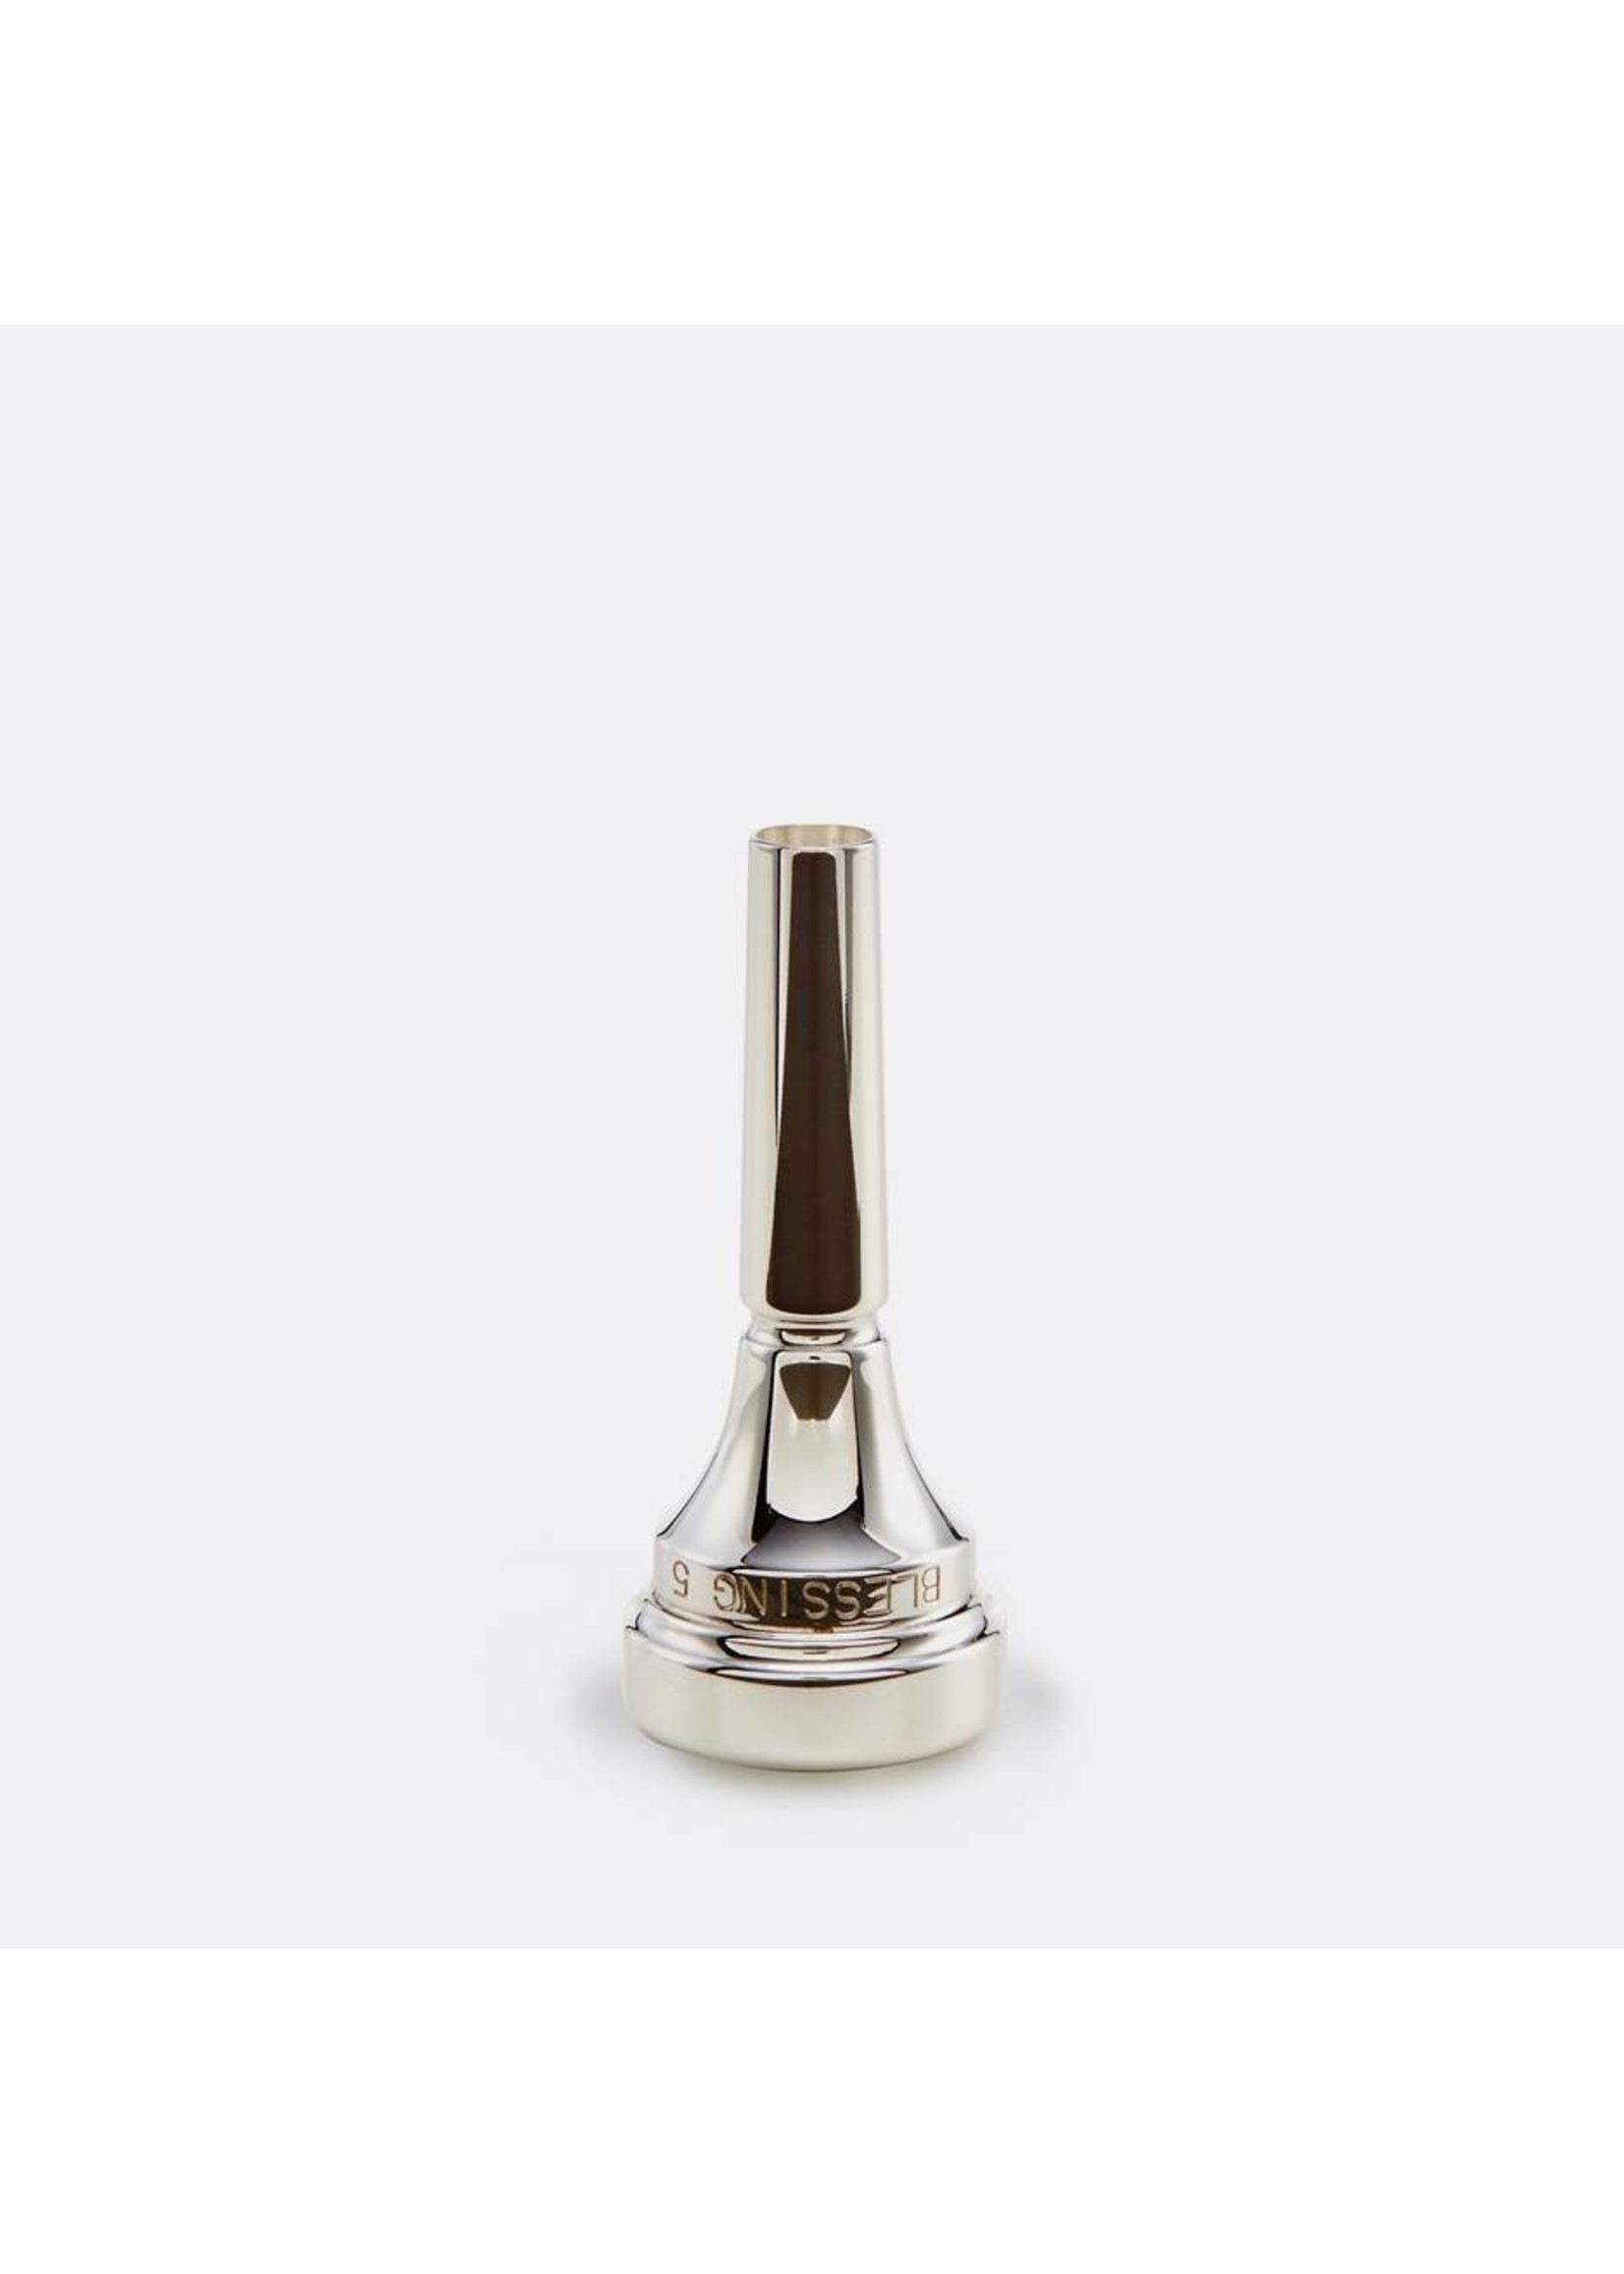 Blessing Blessing 5C Trumpet Mouthpiece